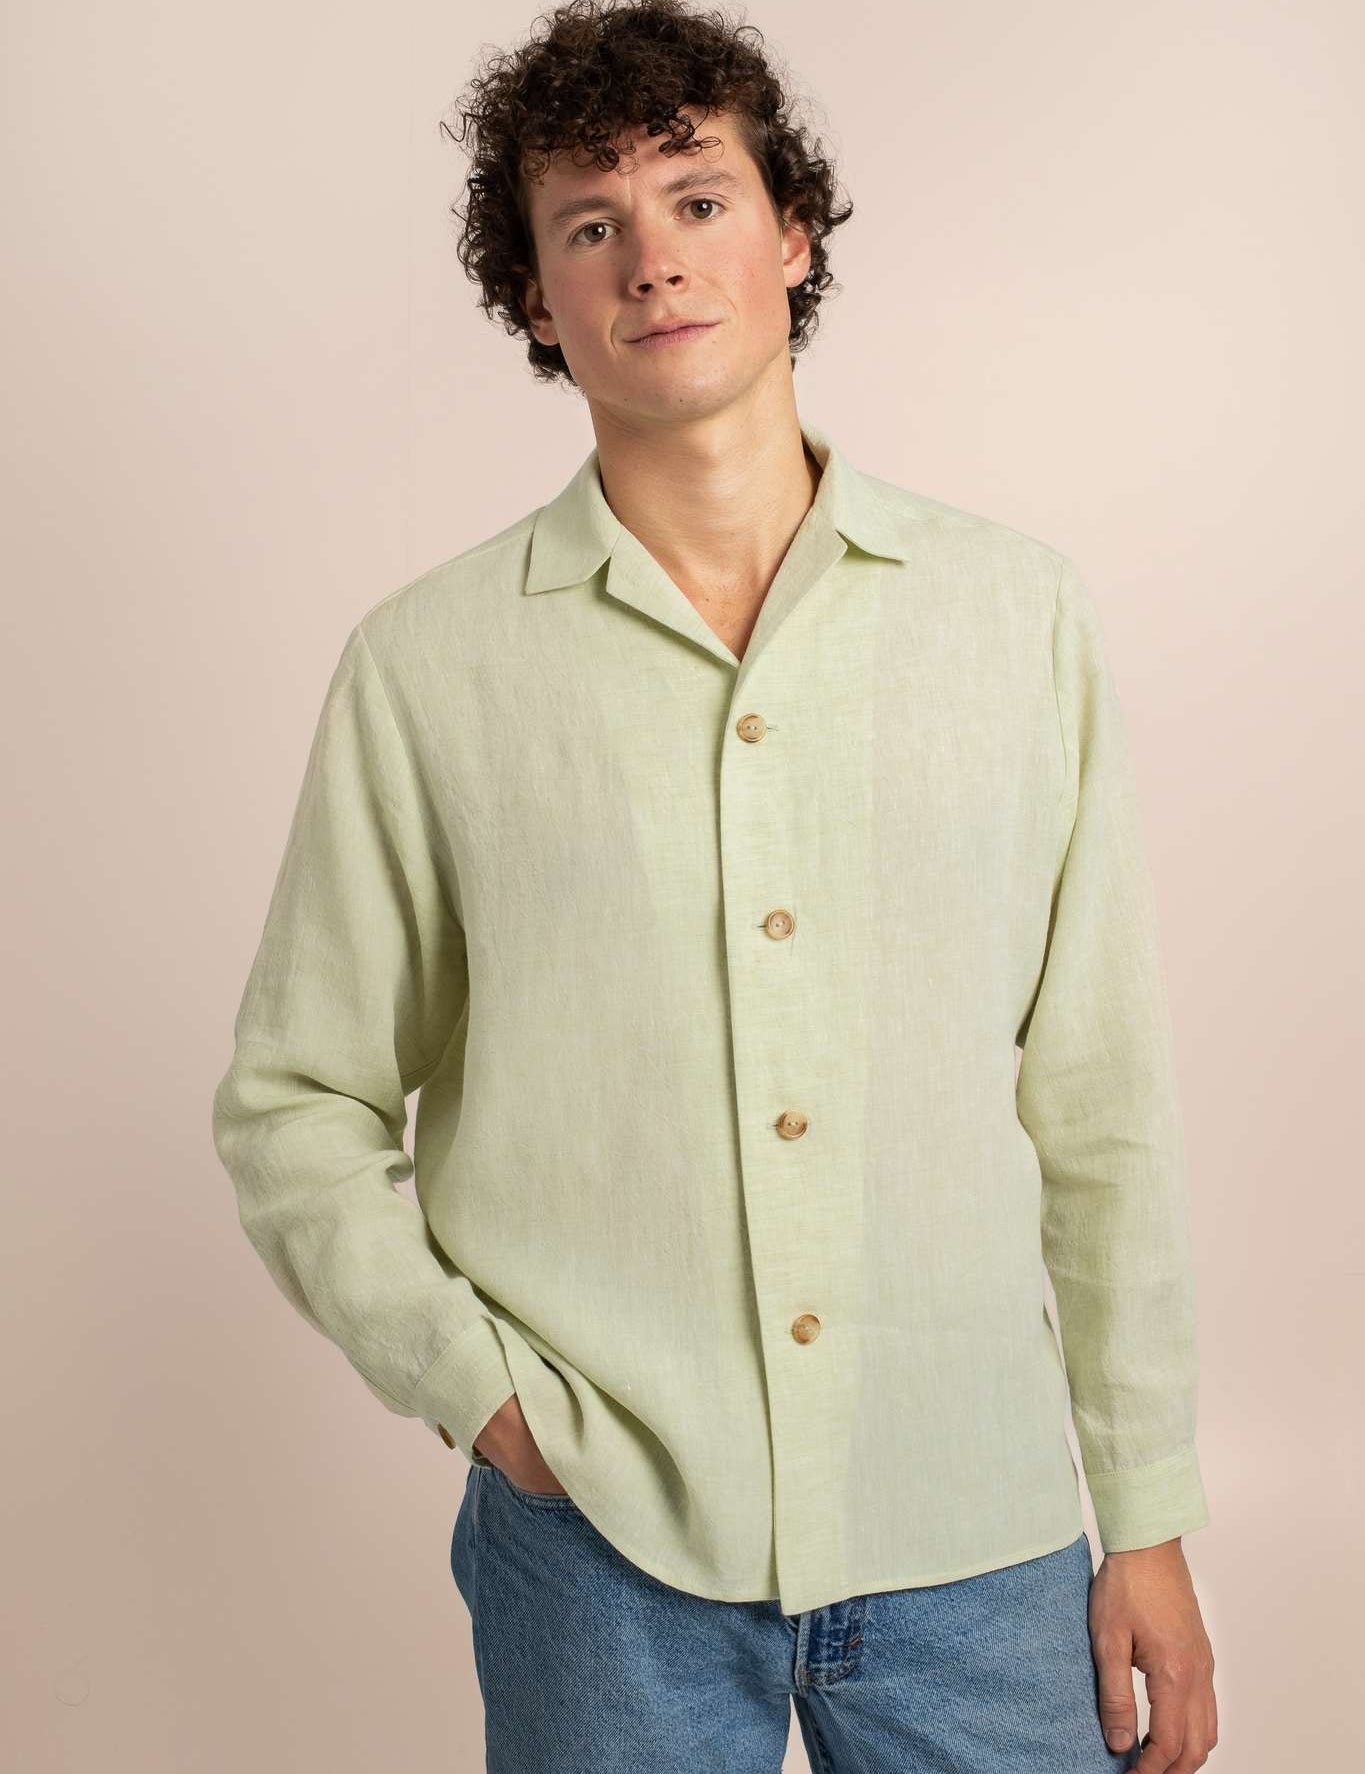 velos-casual-linen-overshirt-front-view_cd612fc0-9373-43a0-8bc6-9e64956af9ba.jpg